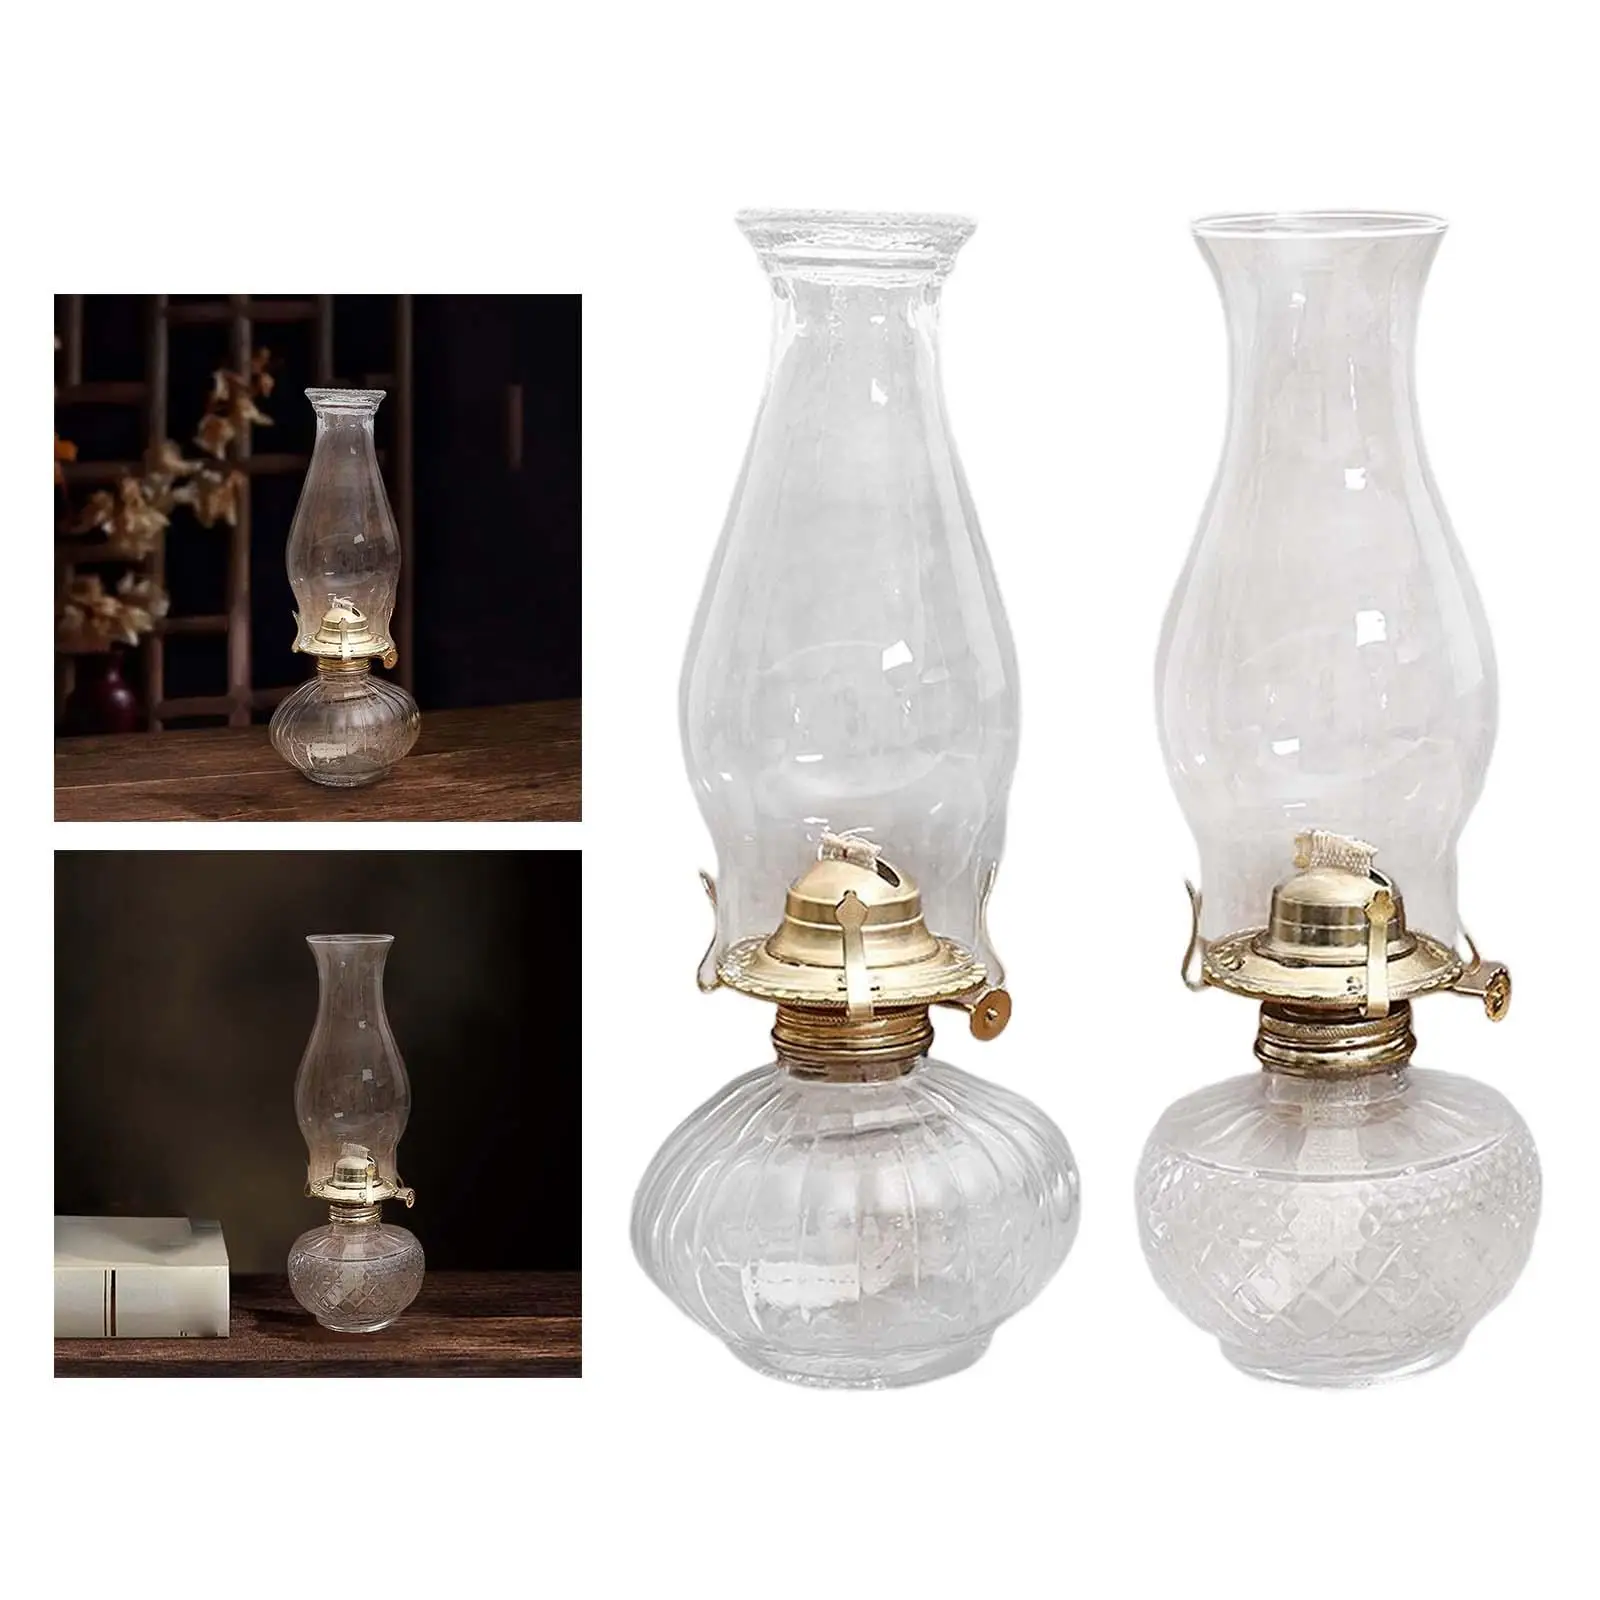 Glass Oil Lantern Lamp Outdoor Camping Tent Light Night Light Table Lamp Durable for Tabletop Church Picnic BBQ Decoration